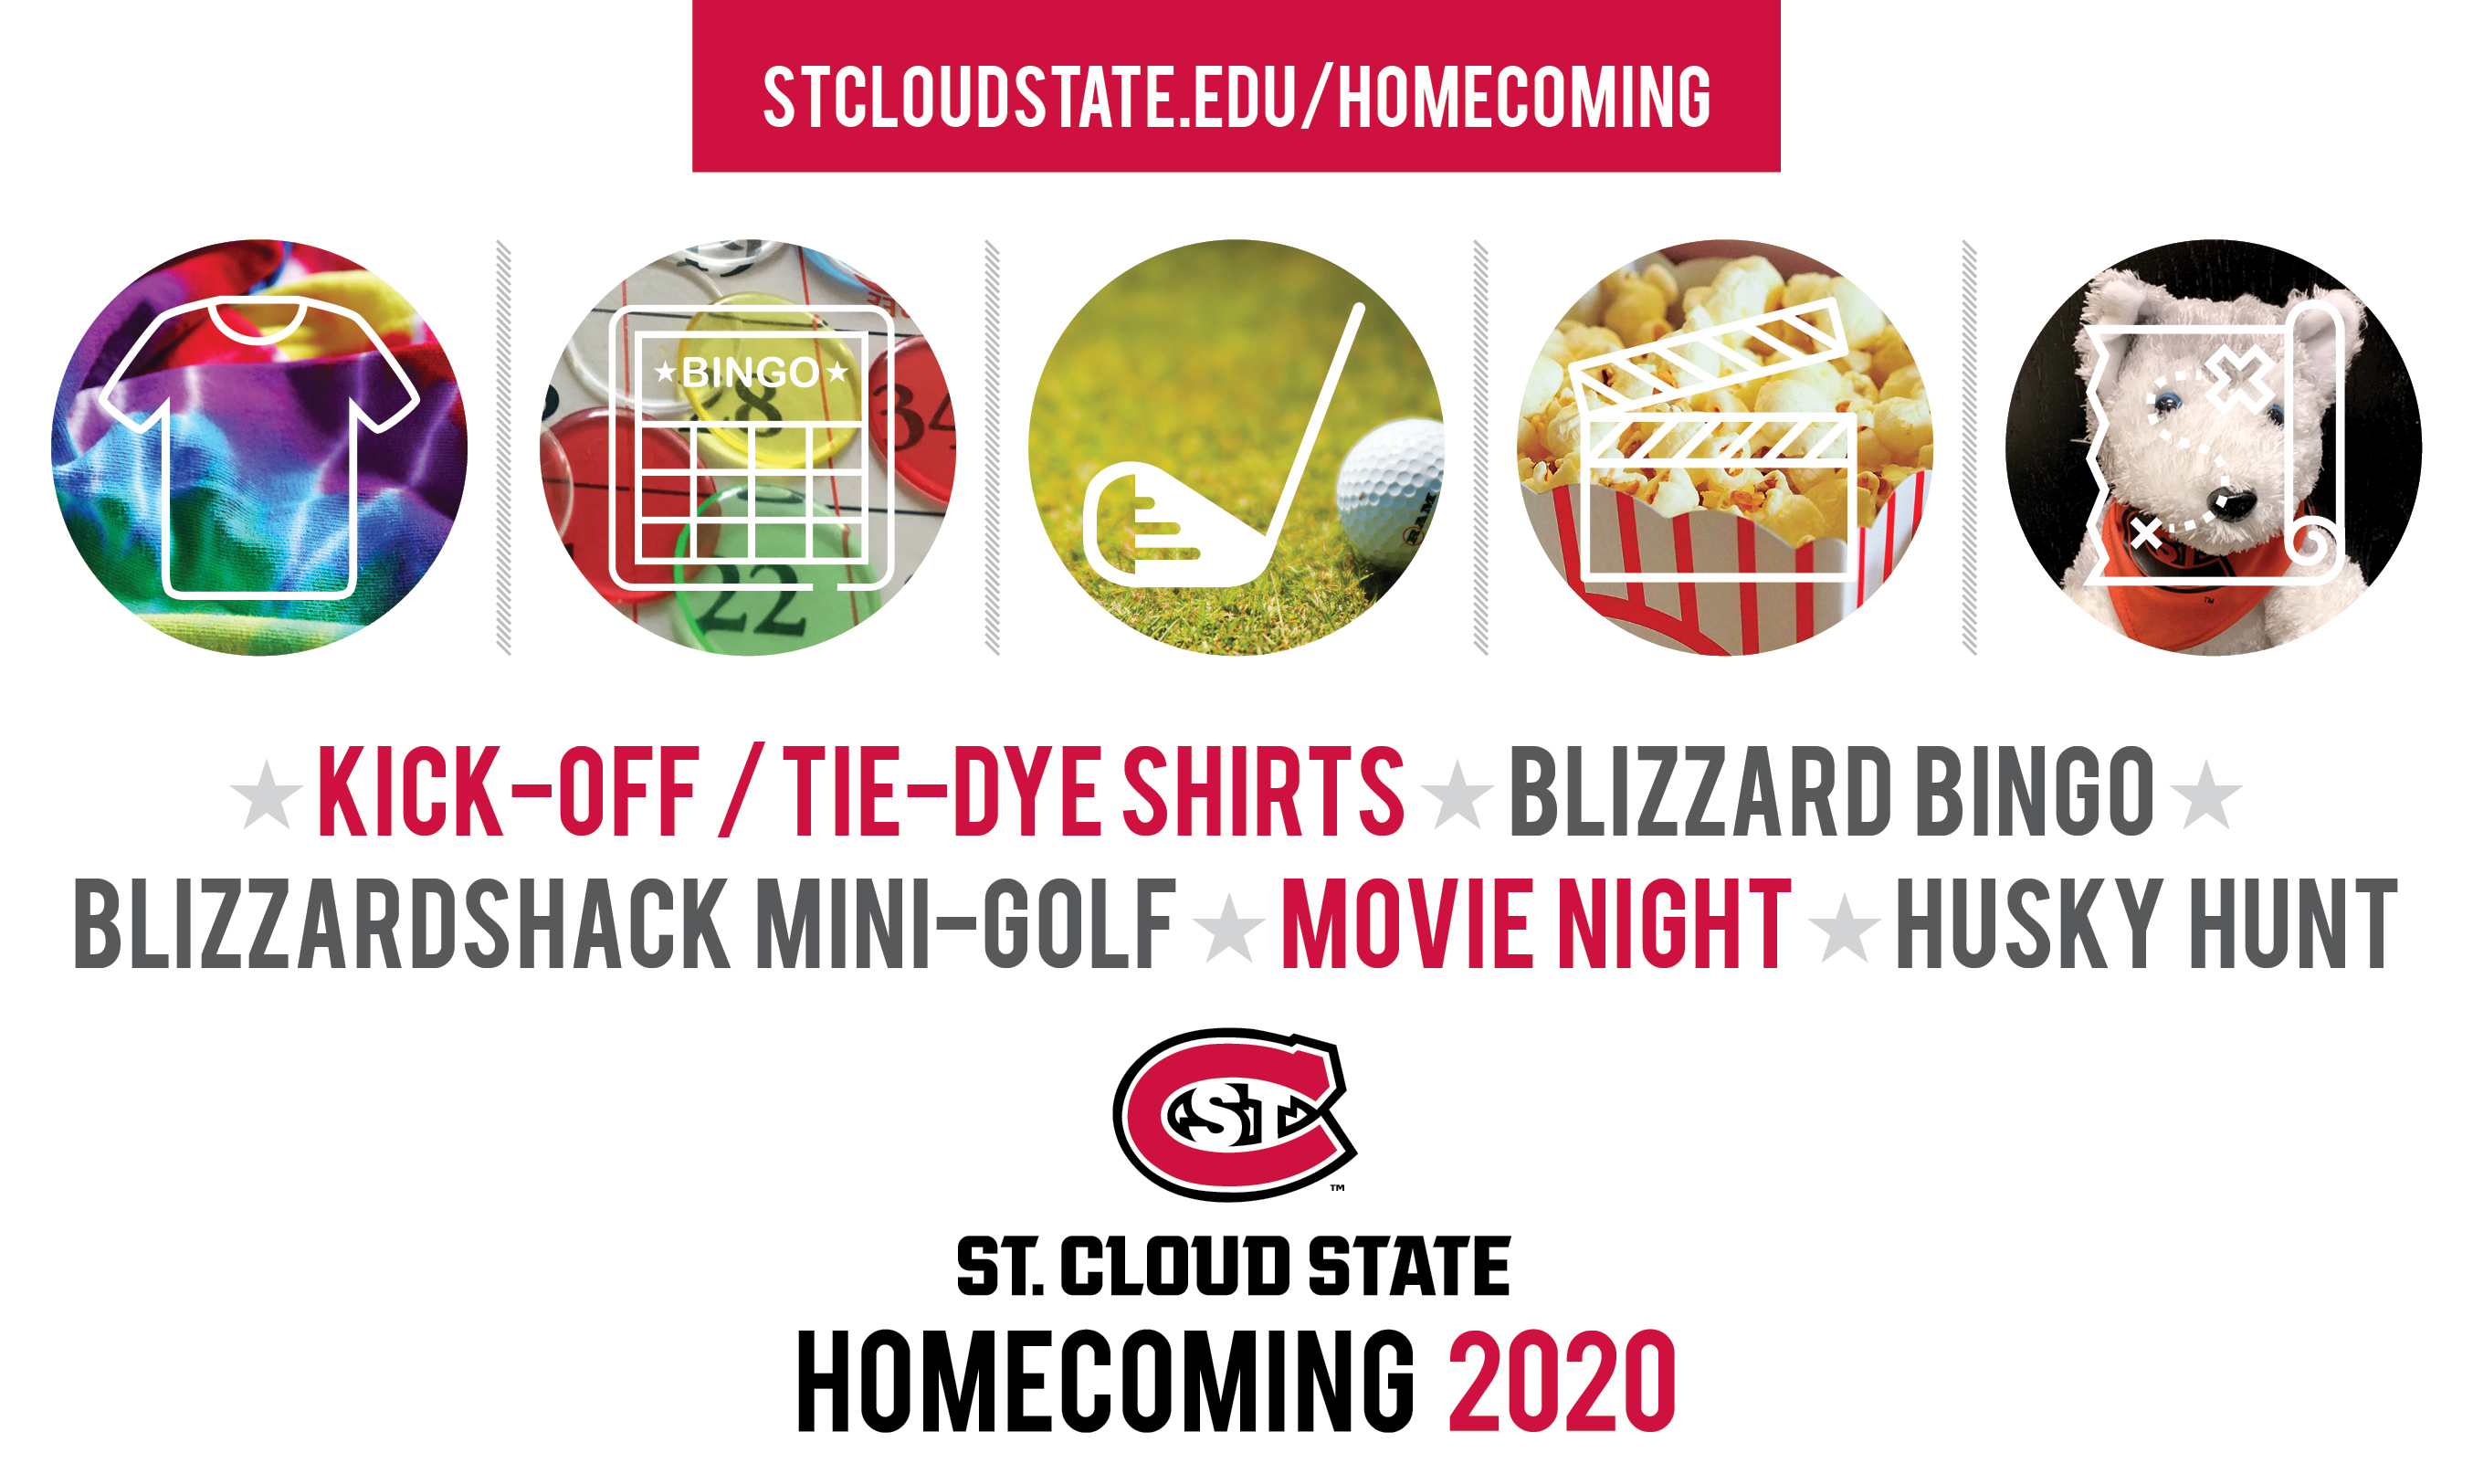 Homecoming 2020 on campus events graphic